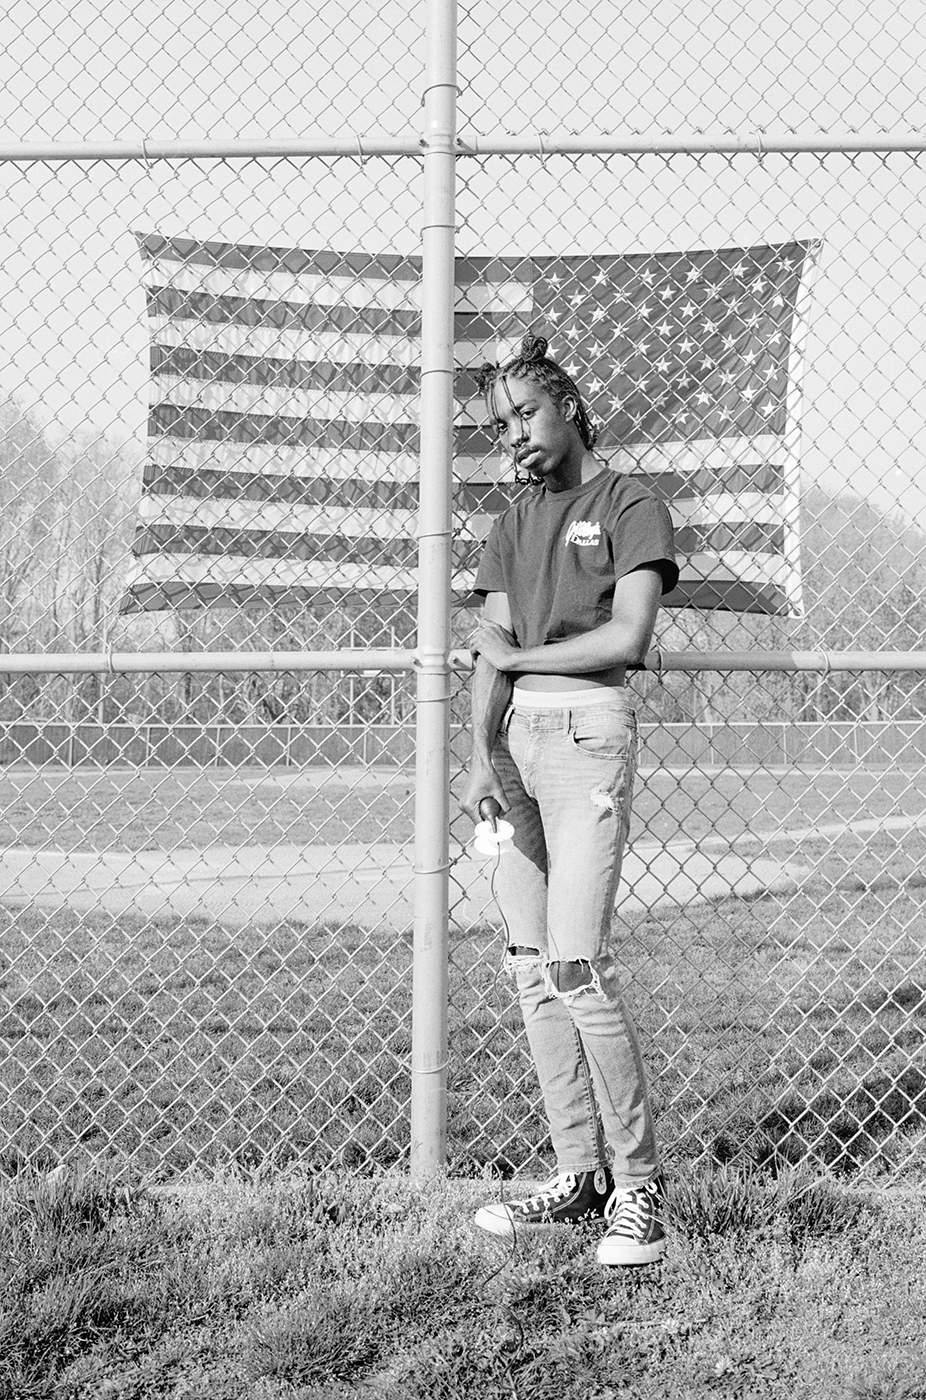 Photograph; a Black person standing in front of a chain link fence with an inverted American flag behind the fence.